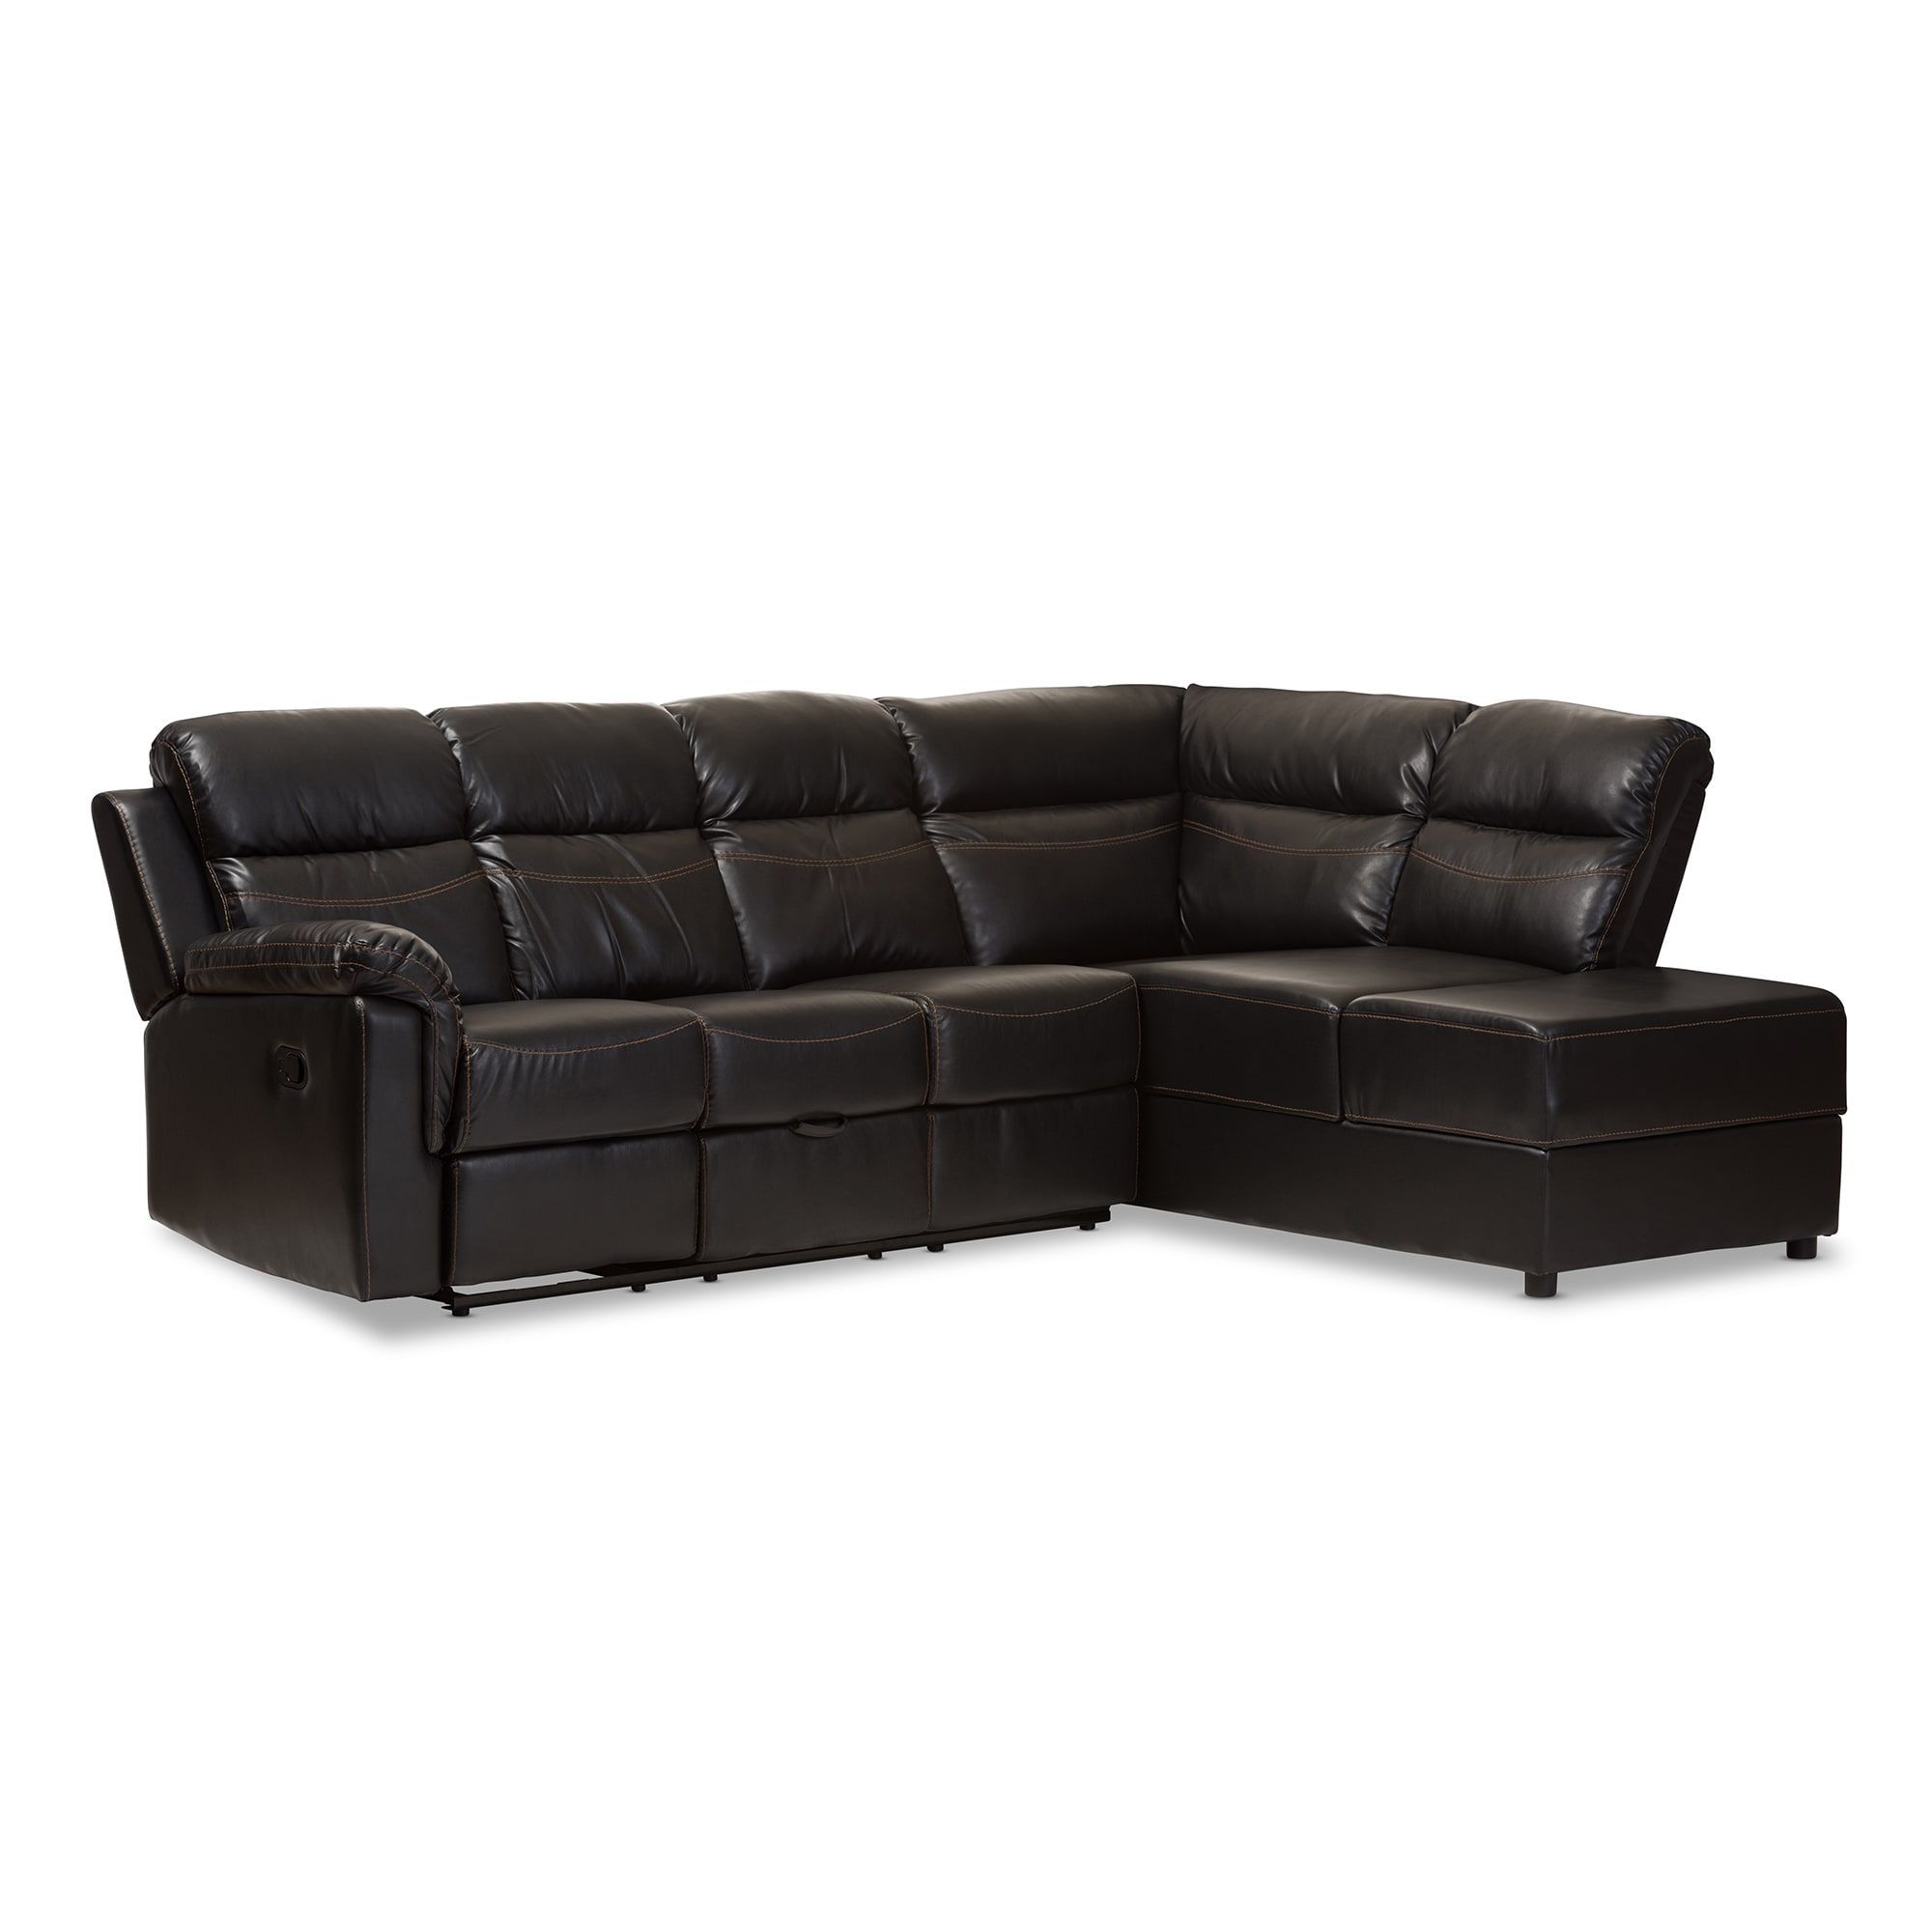 Our Best Living Room Furniture Deals | Storage Chaise With 2Pc Burland Contemporary Sectional Sofas Charcoal (View 6 of 15)